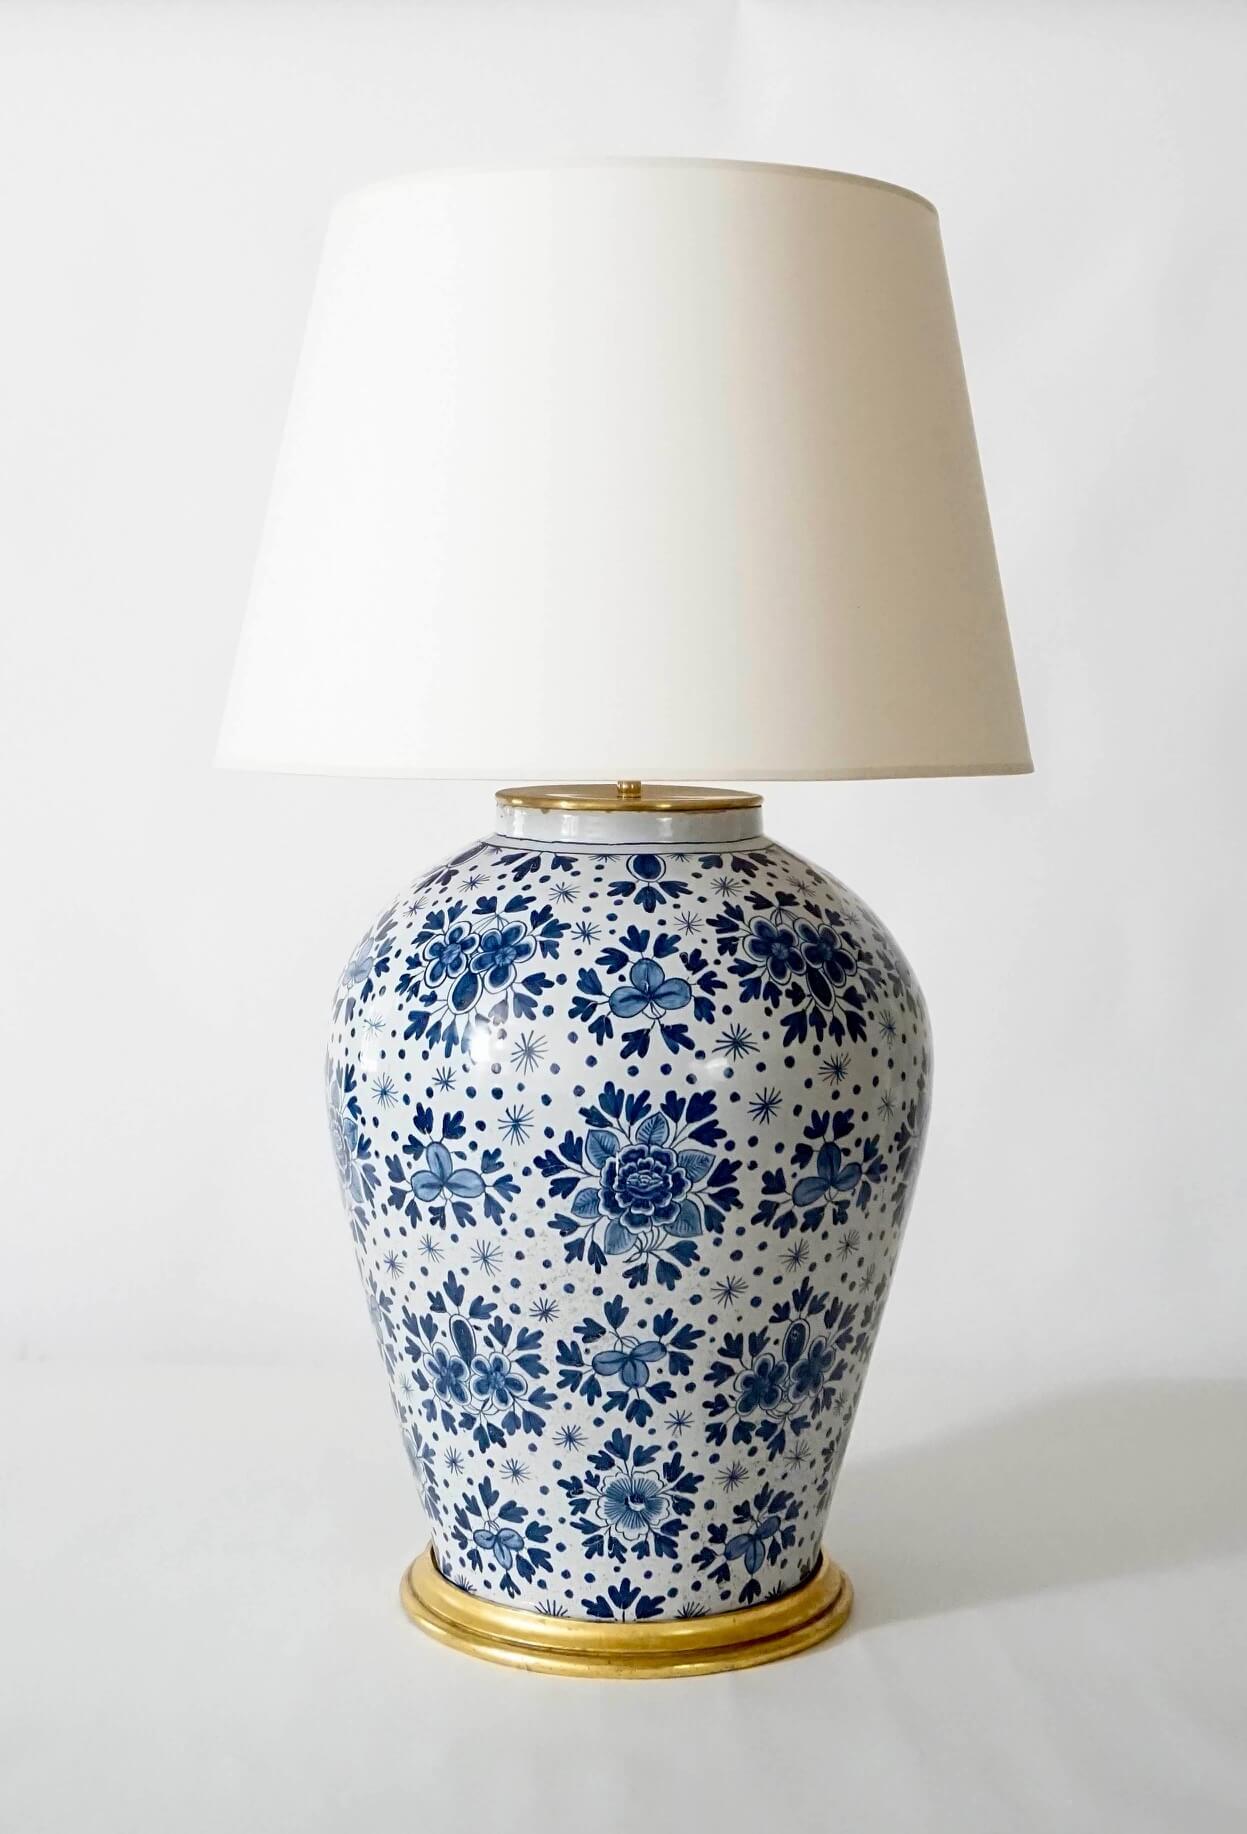 Hand-Crafted Pair of Large Scale Blue and White Dutch Delft Vase Table Lamps, circa 1850 For Sale